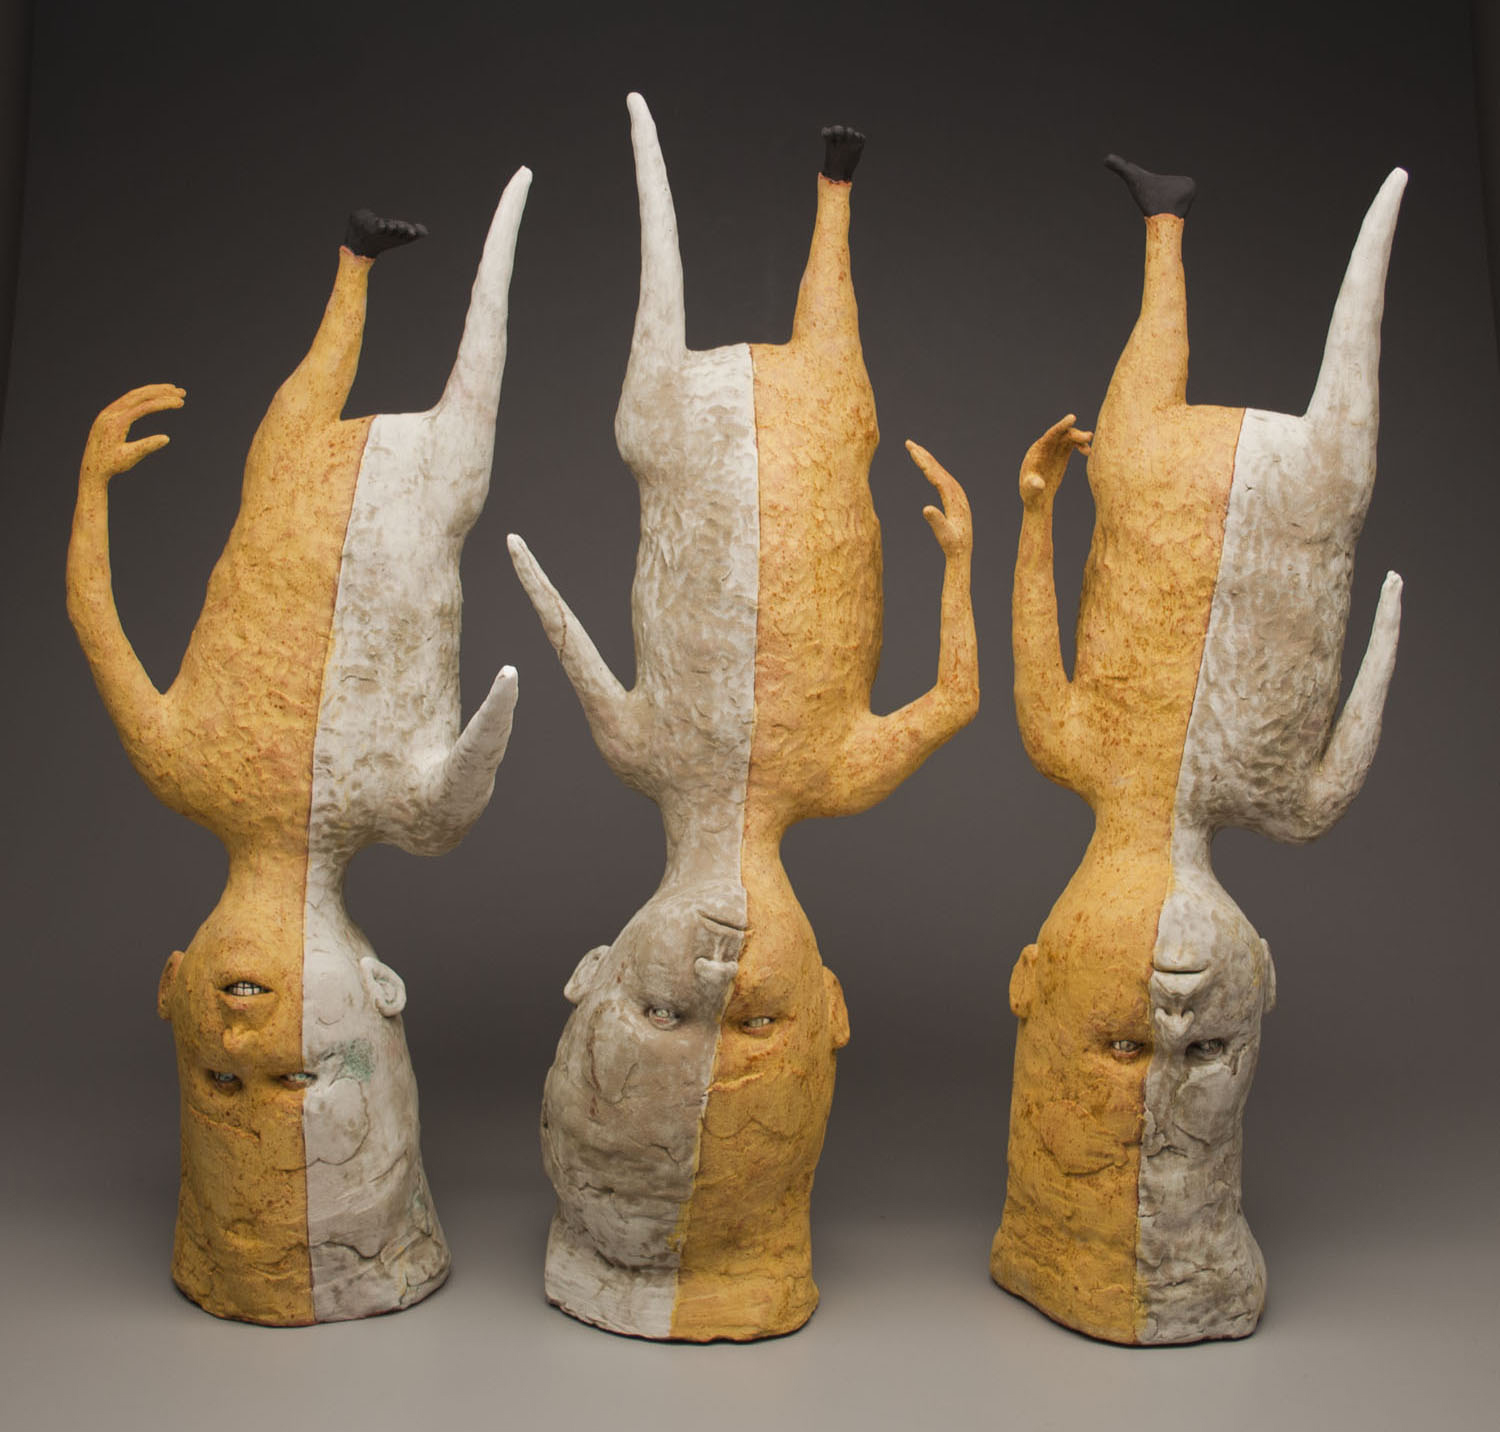 Crisha Yantis, "A Different Point of View," is one of two pieces featured in the book "500 Figures in Clay Vol. 2" by Lark Ceramics.